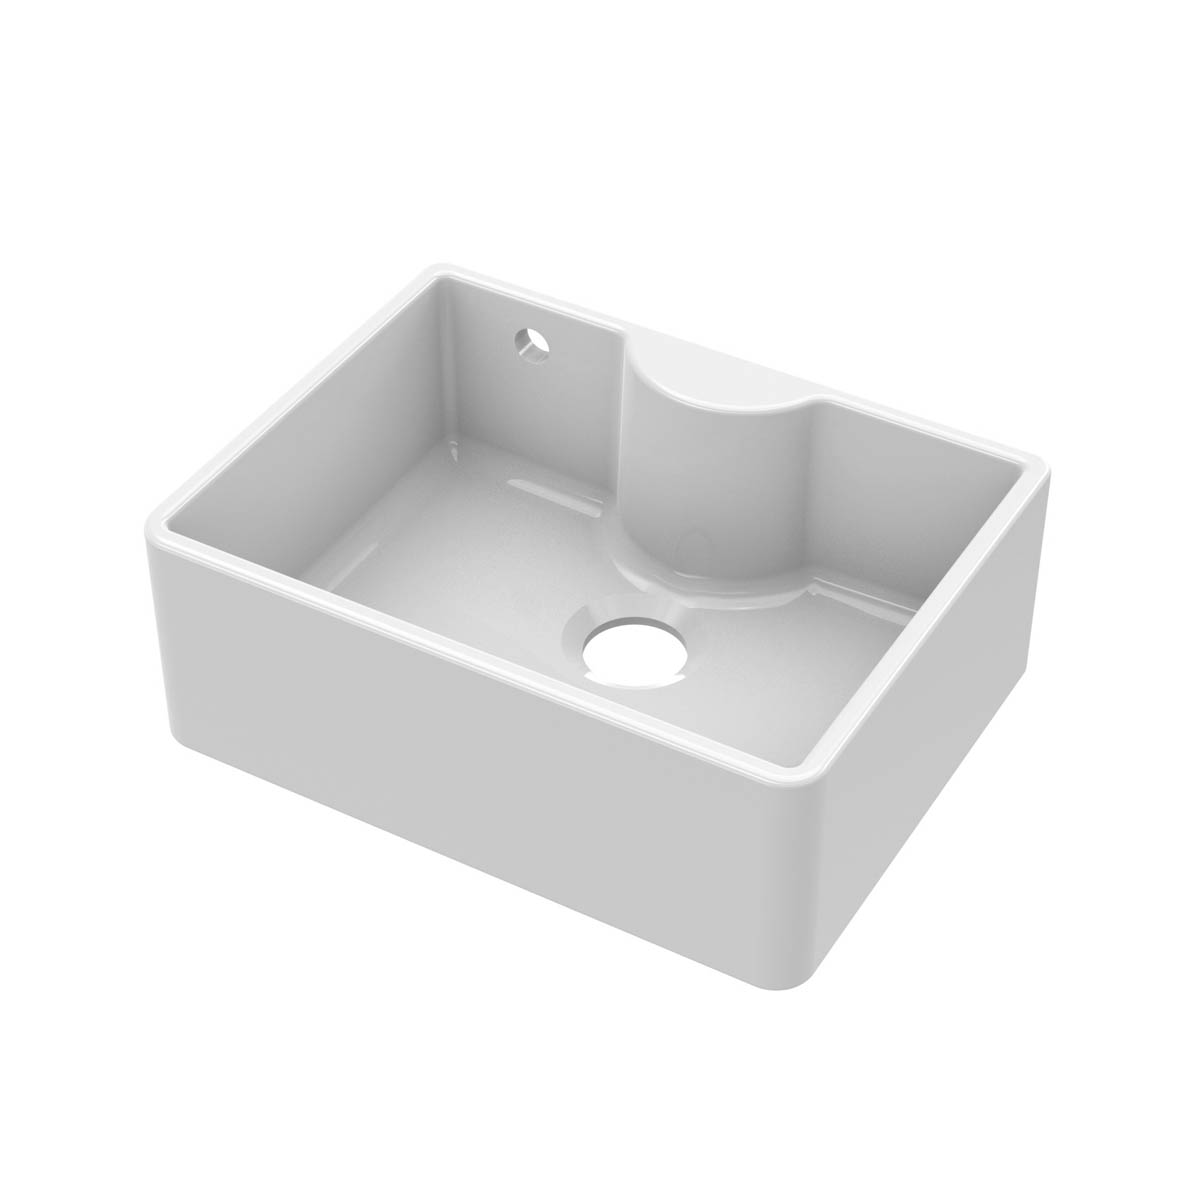 Nuie Butler 595x450x220mm Fireclay Sink with Central Waste, Overflow & Tap Ledge - White (20286)